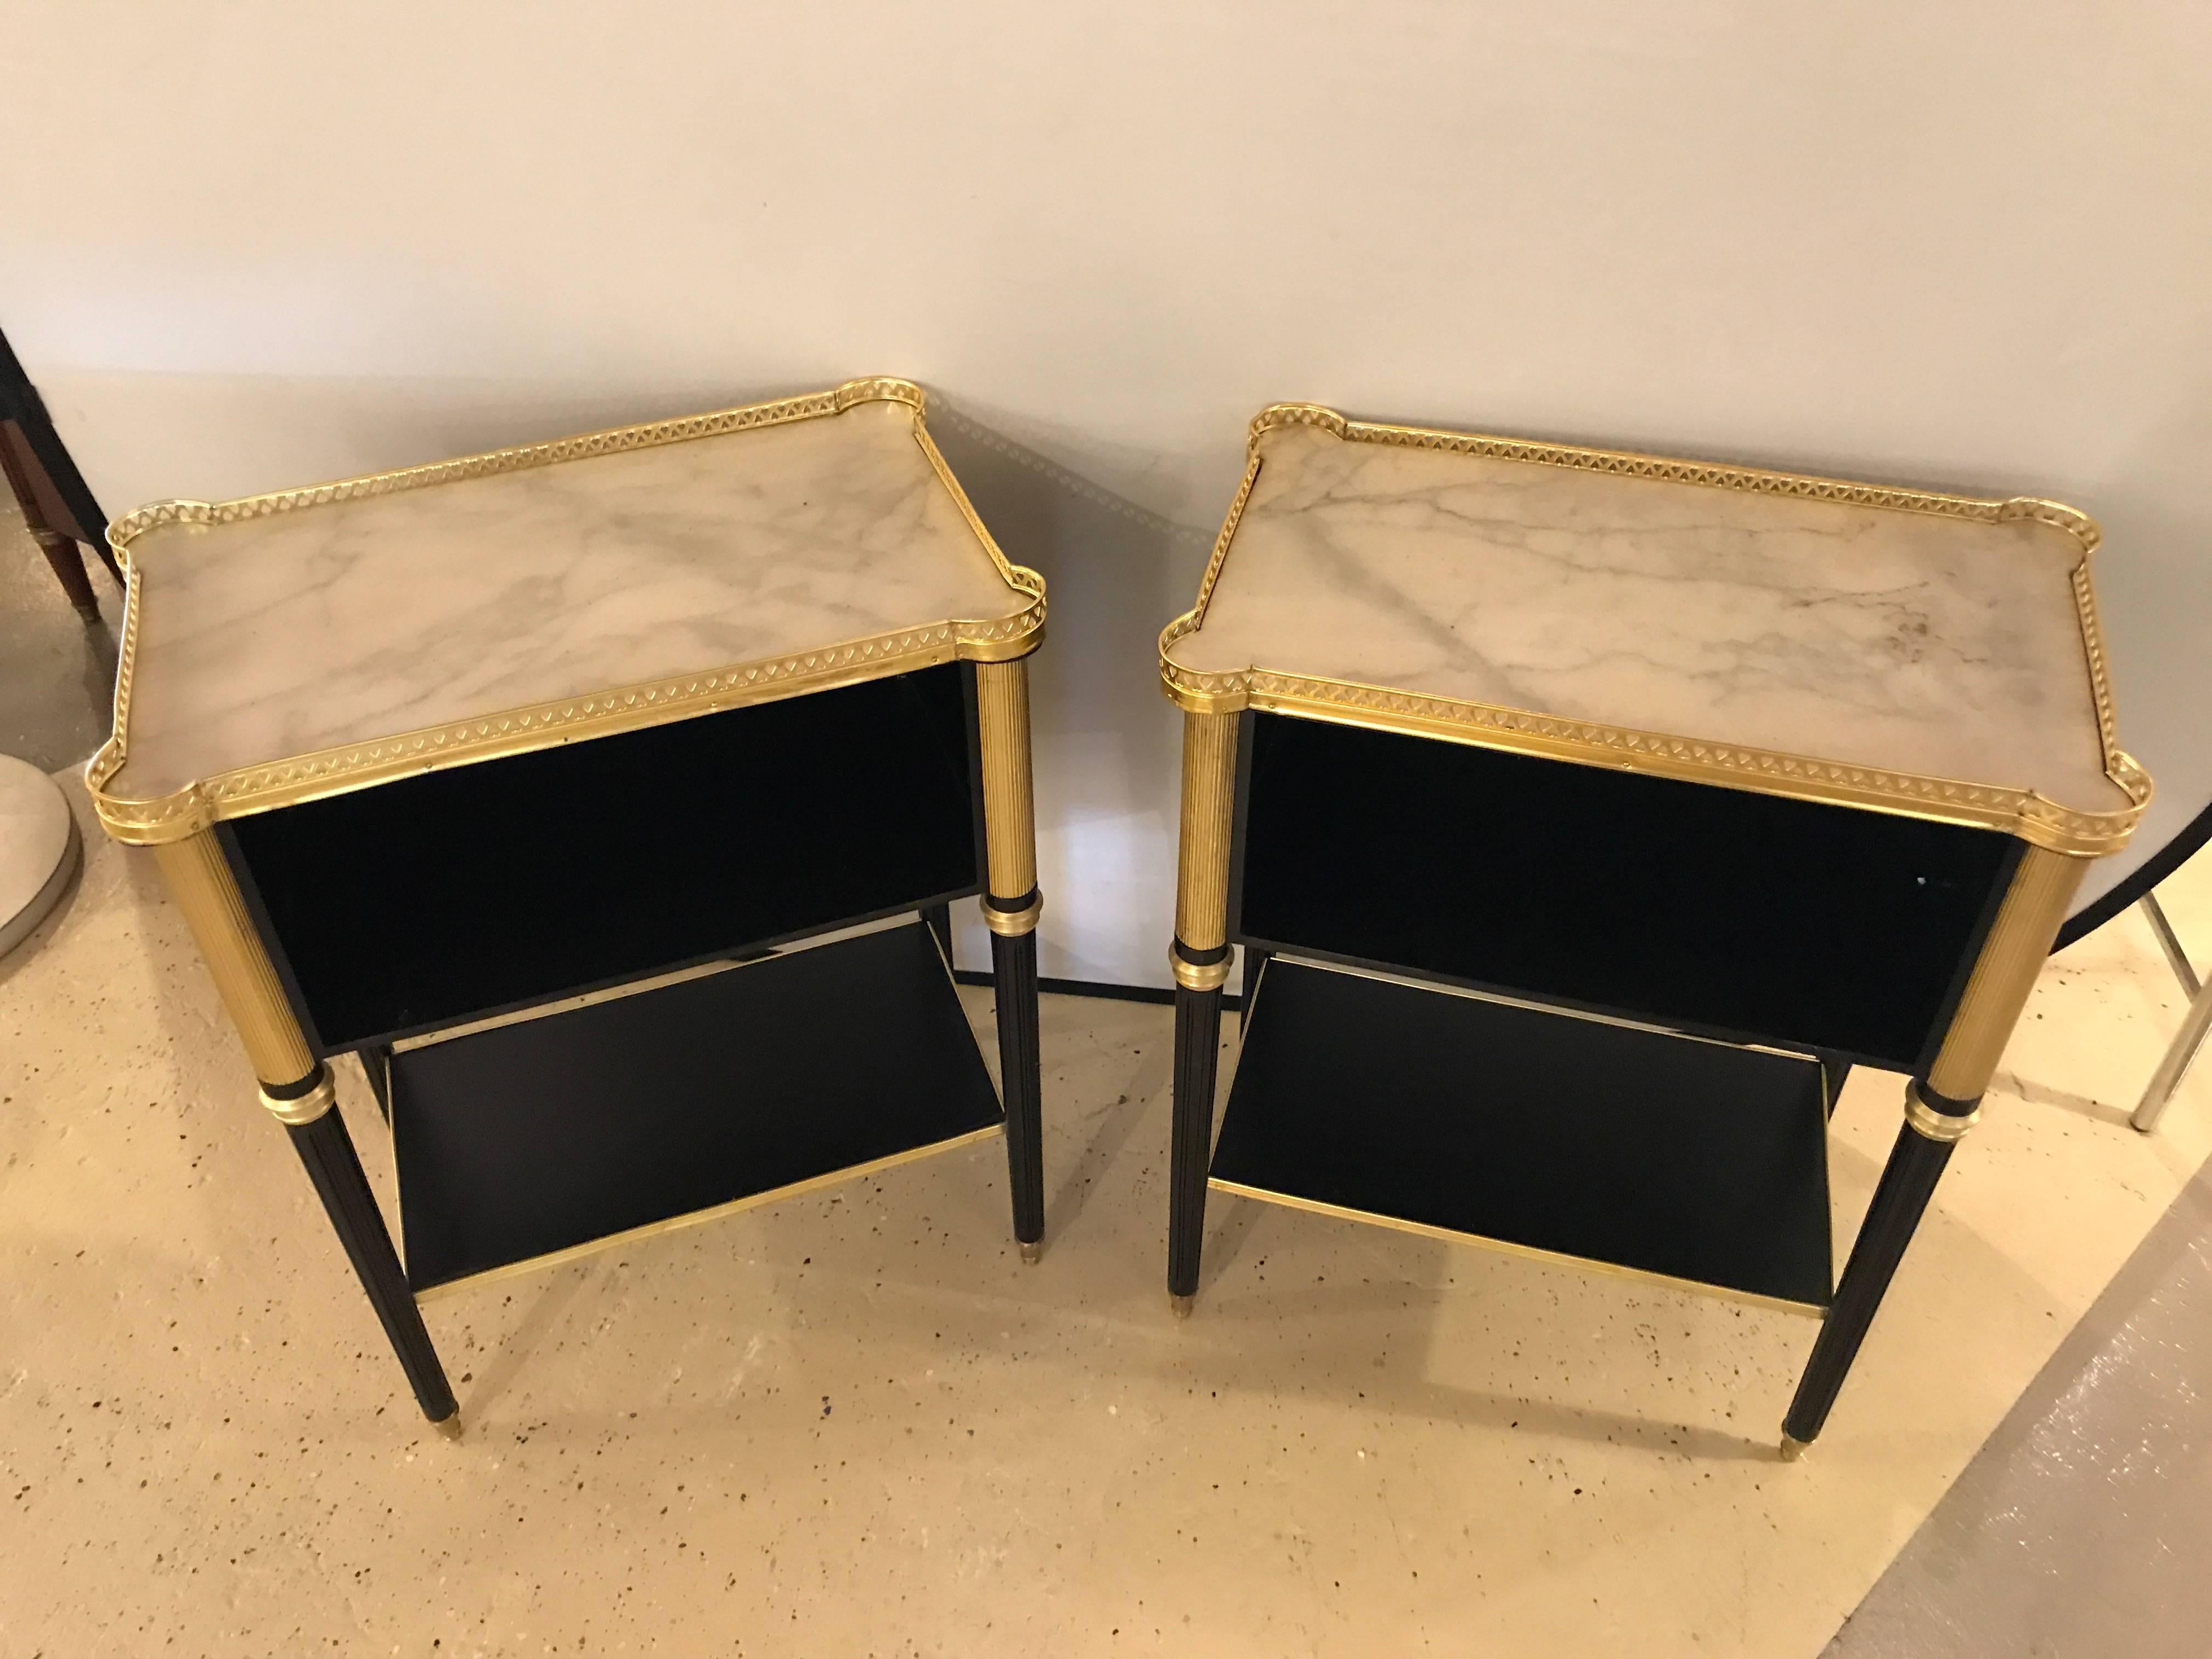 A fine pair of Jansen style marble-top end tables. This fine pair of Louis XVI style end tables or bedside stands depict the Jansen style and Hollywood Regency era flawlessly. The heavy bronze-mounted tapering legs have a bronze framed lower shelf